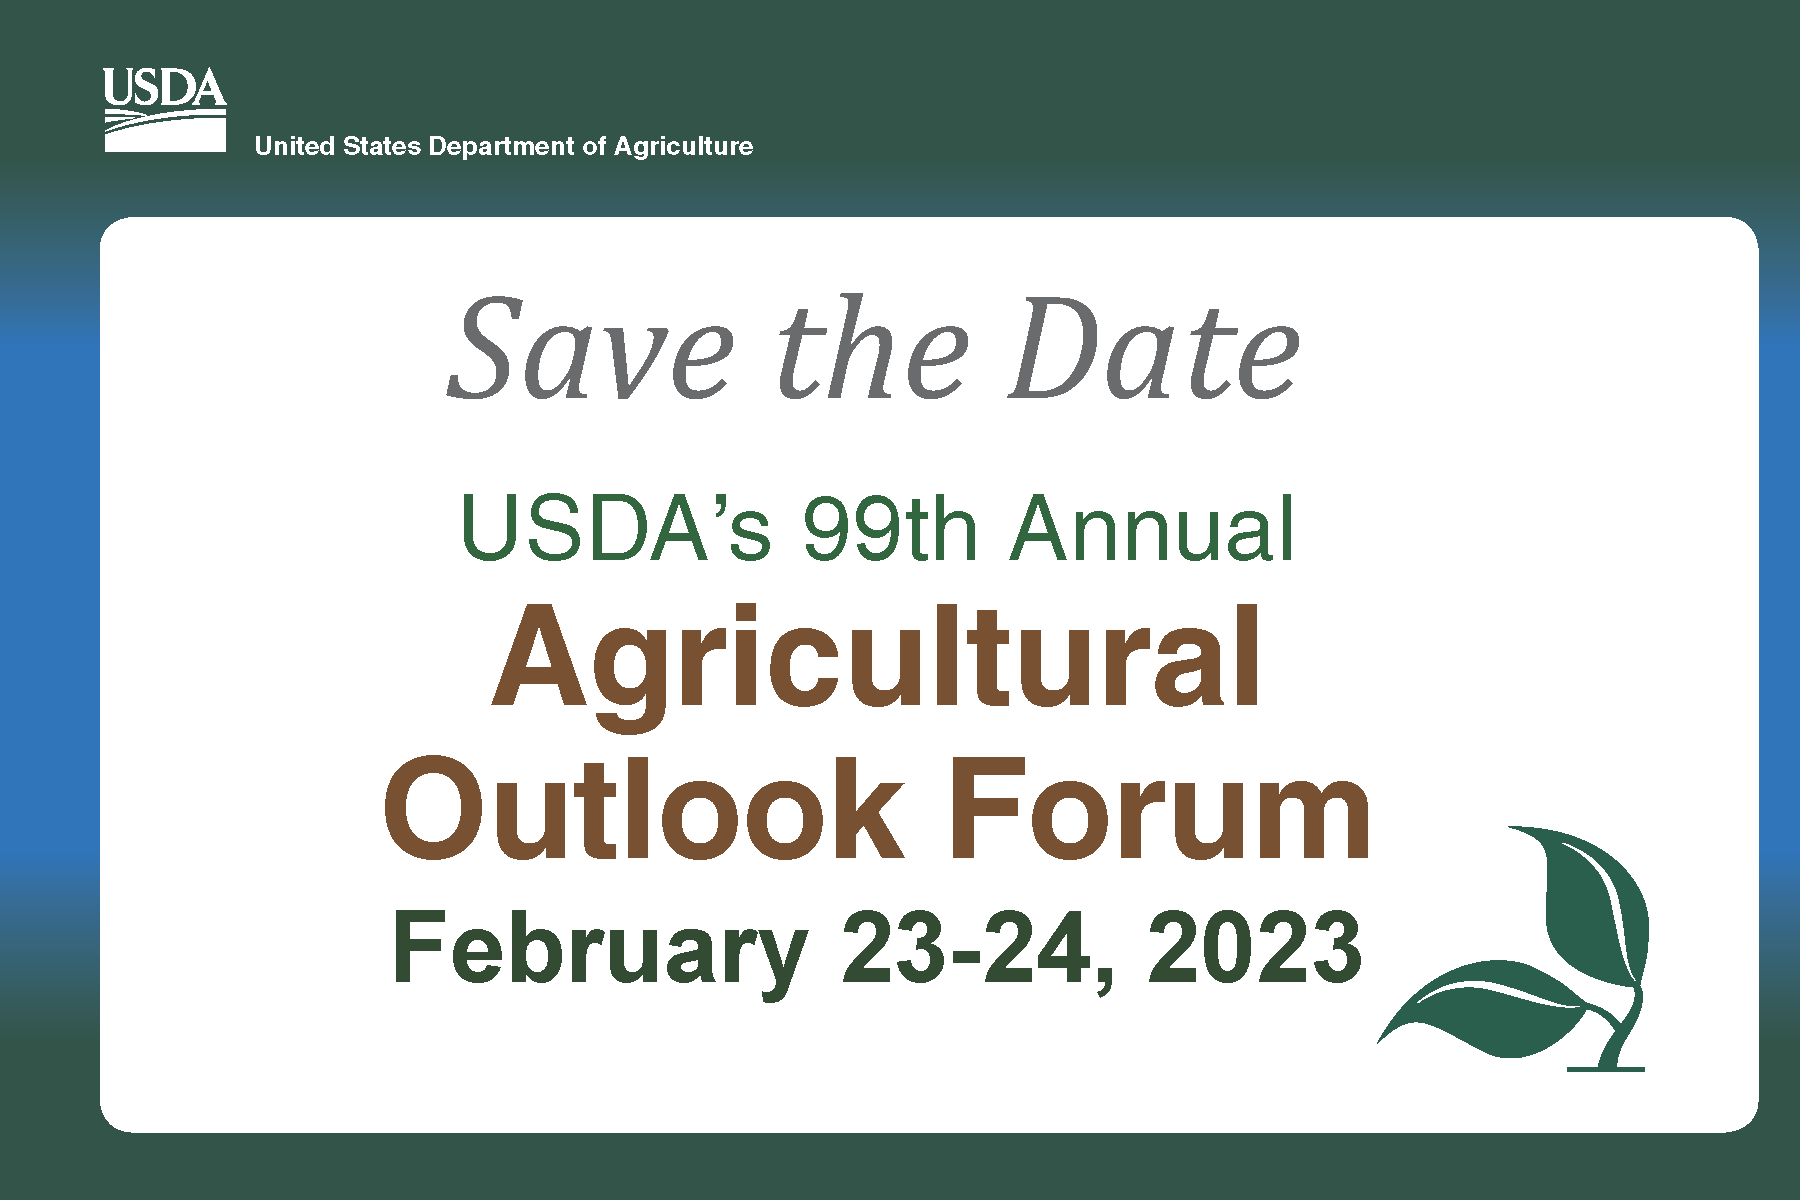 Ag Outlook Forum save the date February 23-24, 2023